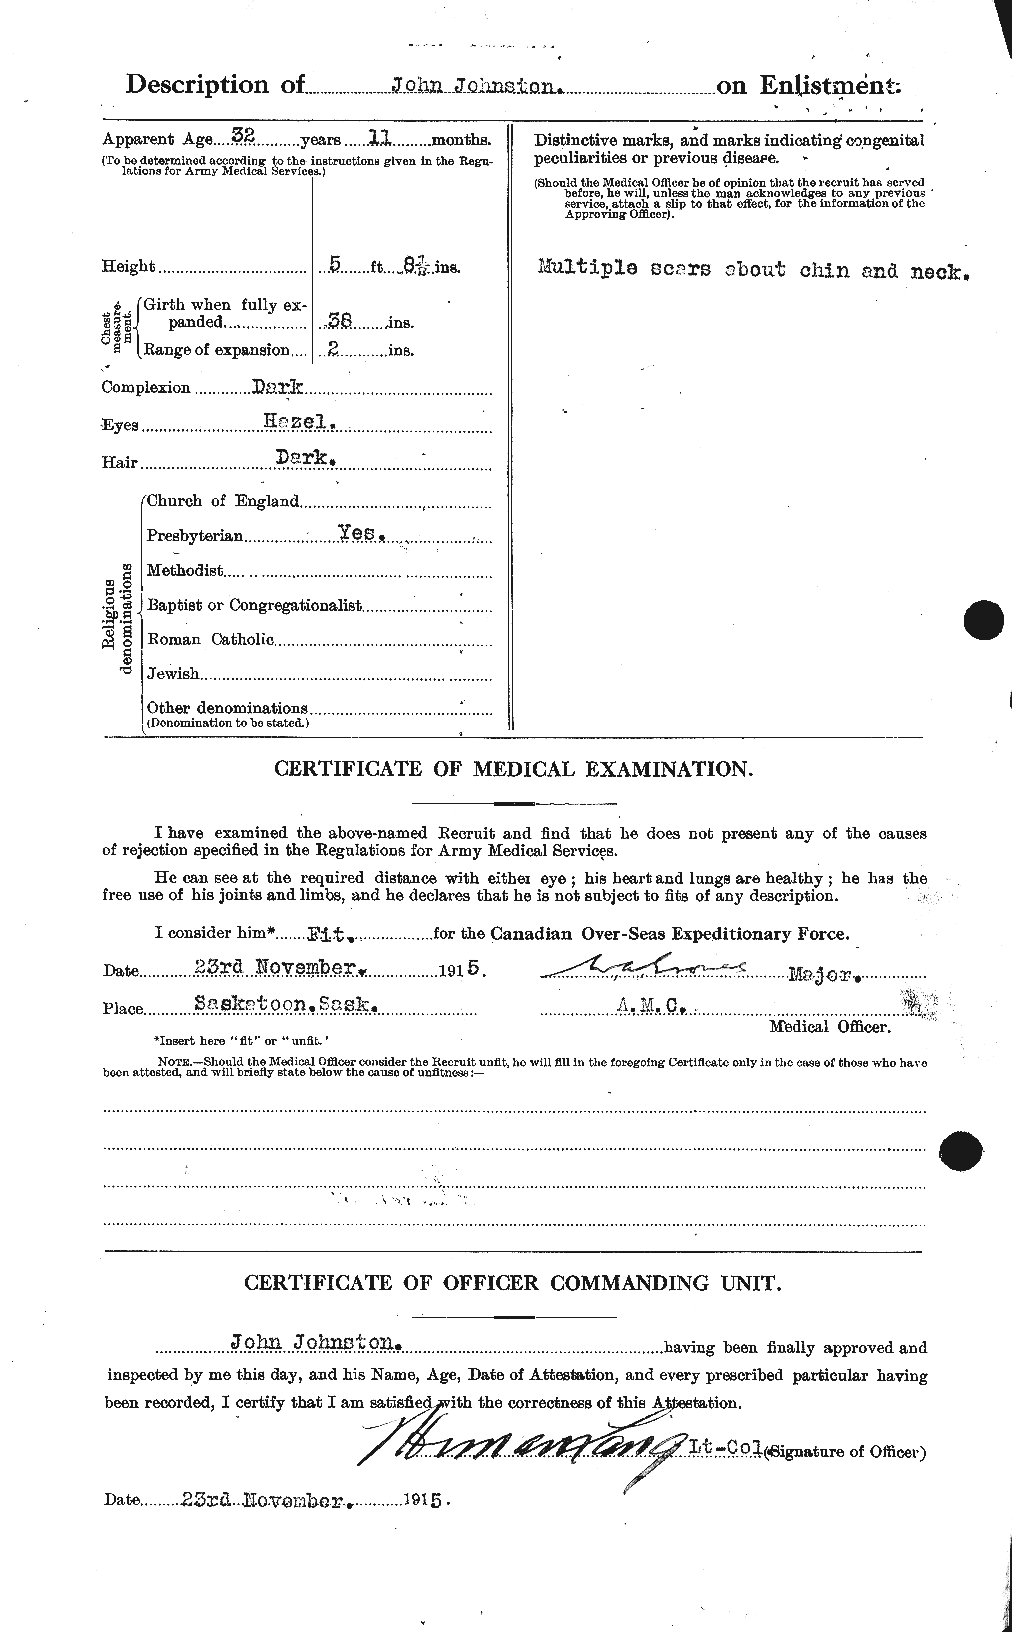 Personnel Records of the First World War - CEF 422778b